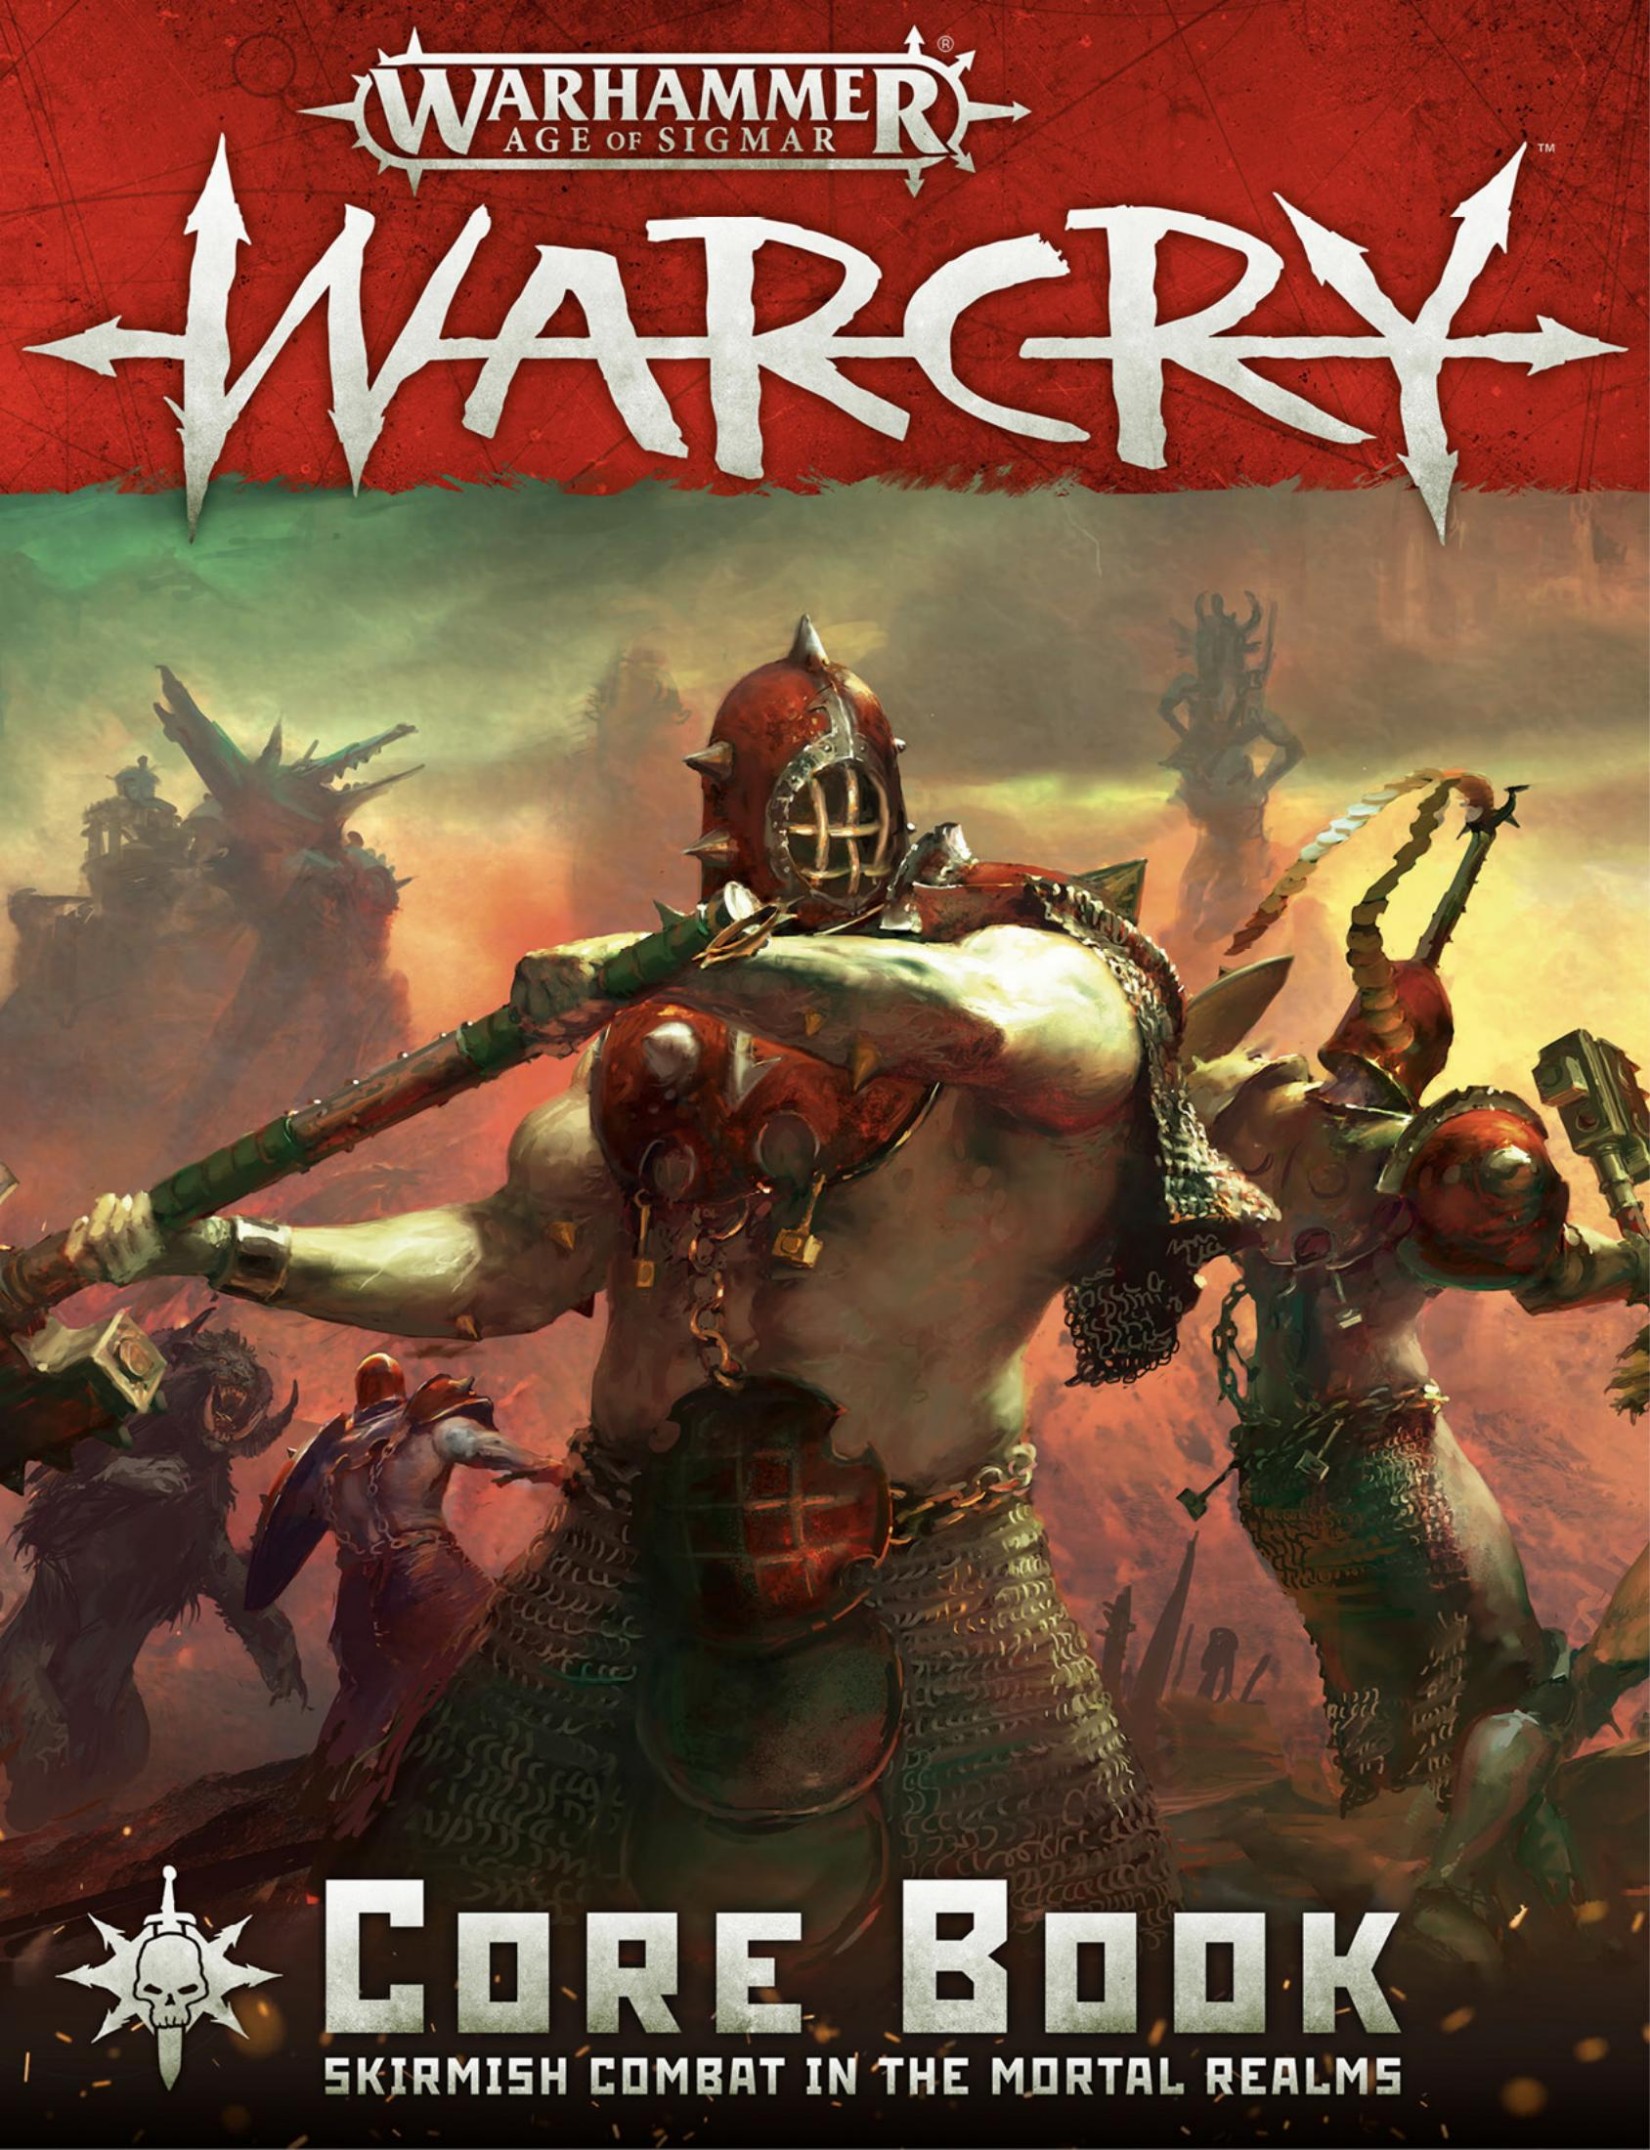 Warhammer Age of Sigmar - Warcry Core Book